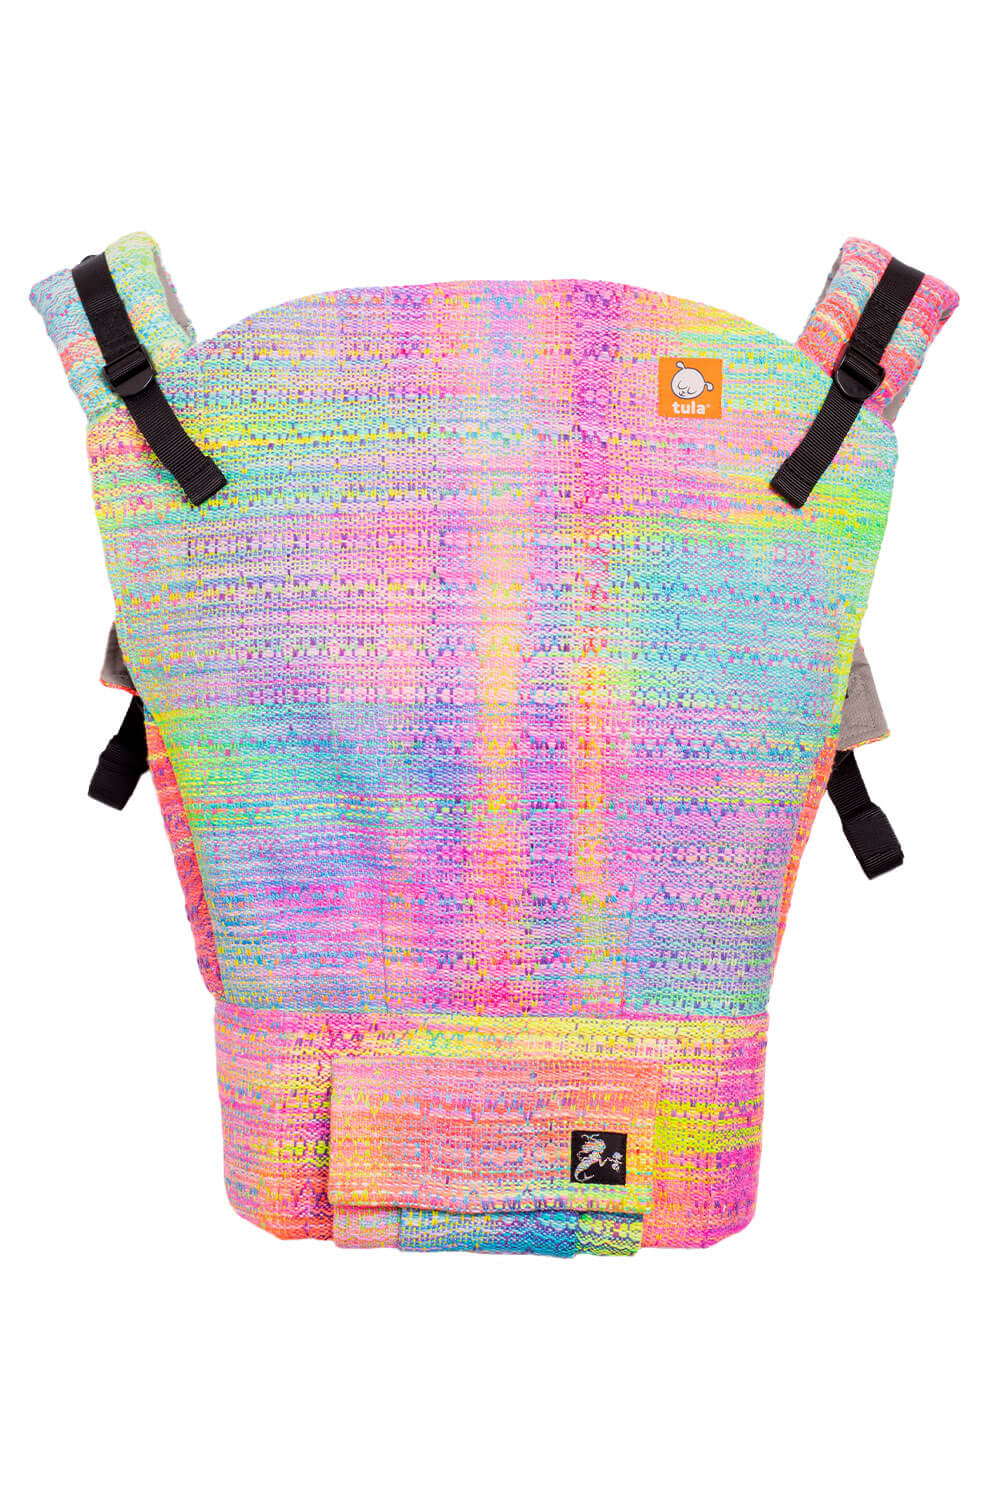 Circus - Signature Handwoven Toddler Carrier